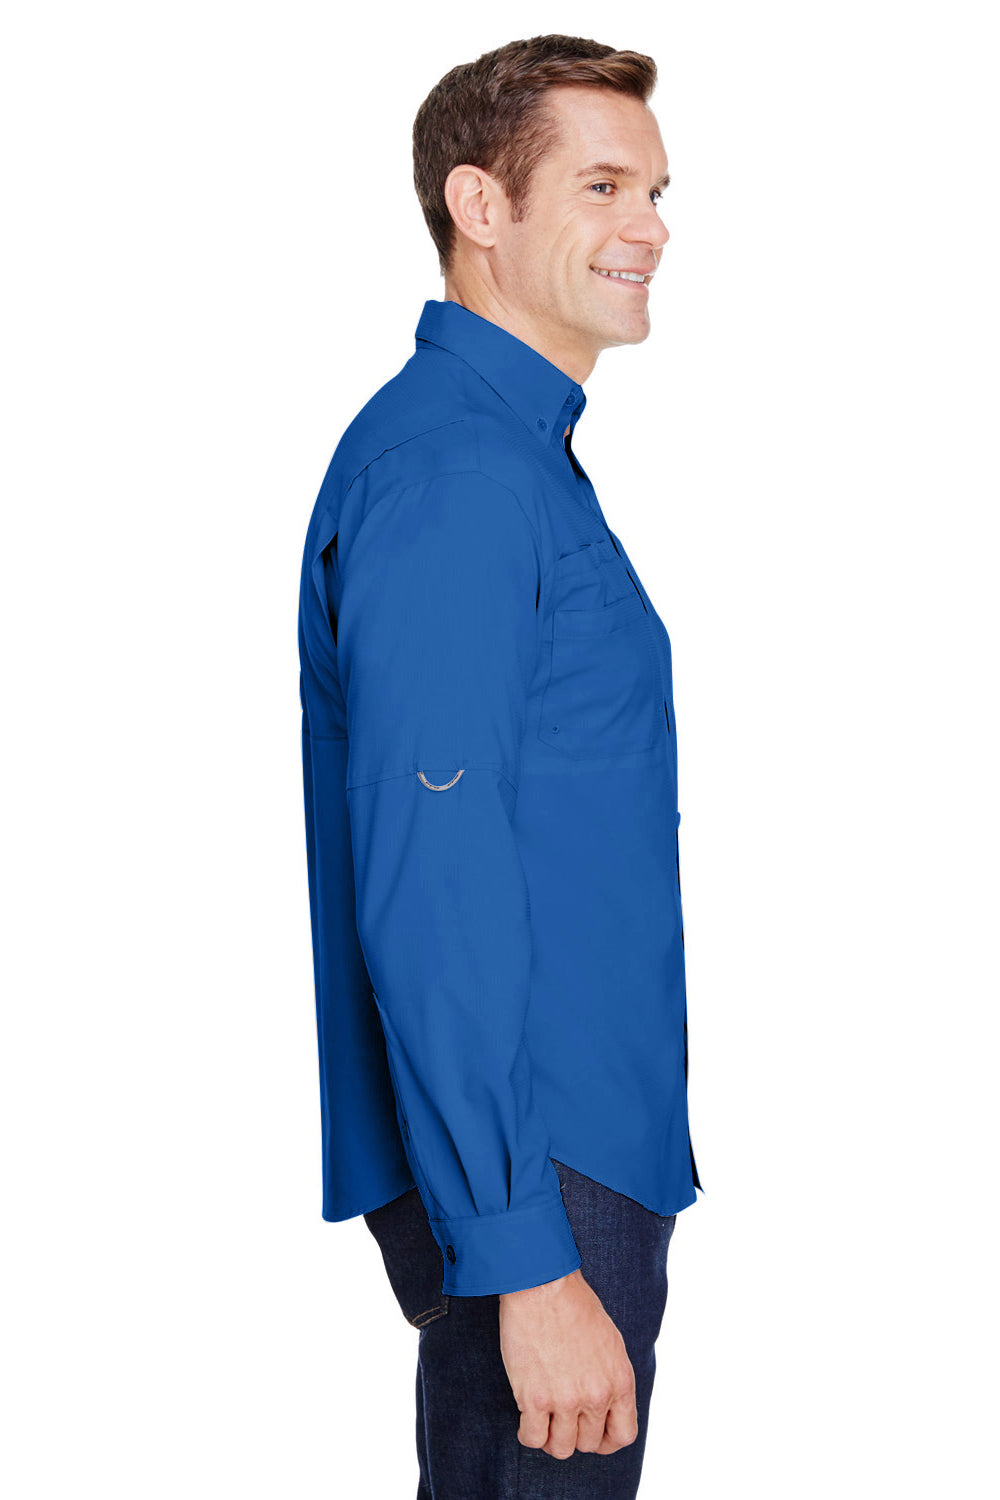 Columbia 7253 Mens Tamiami II Moisture Wicking Long Sleeve Button Down Shirt w/ Double Pockets Vivid Blue Side